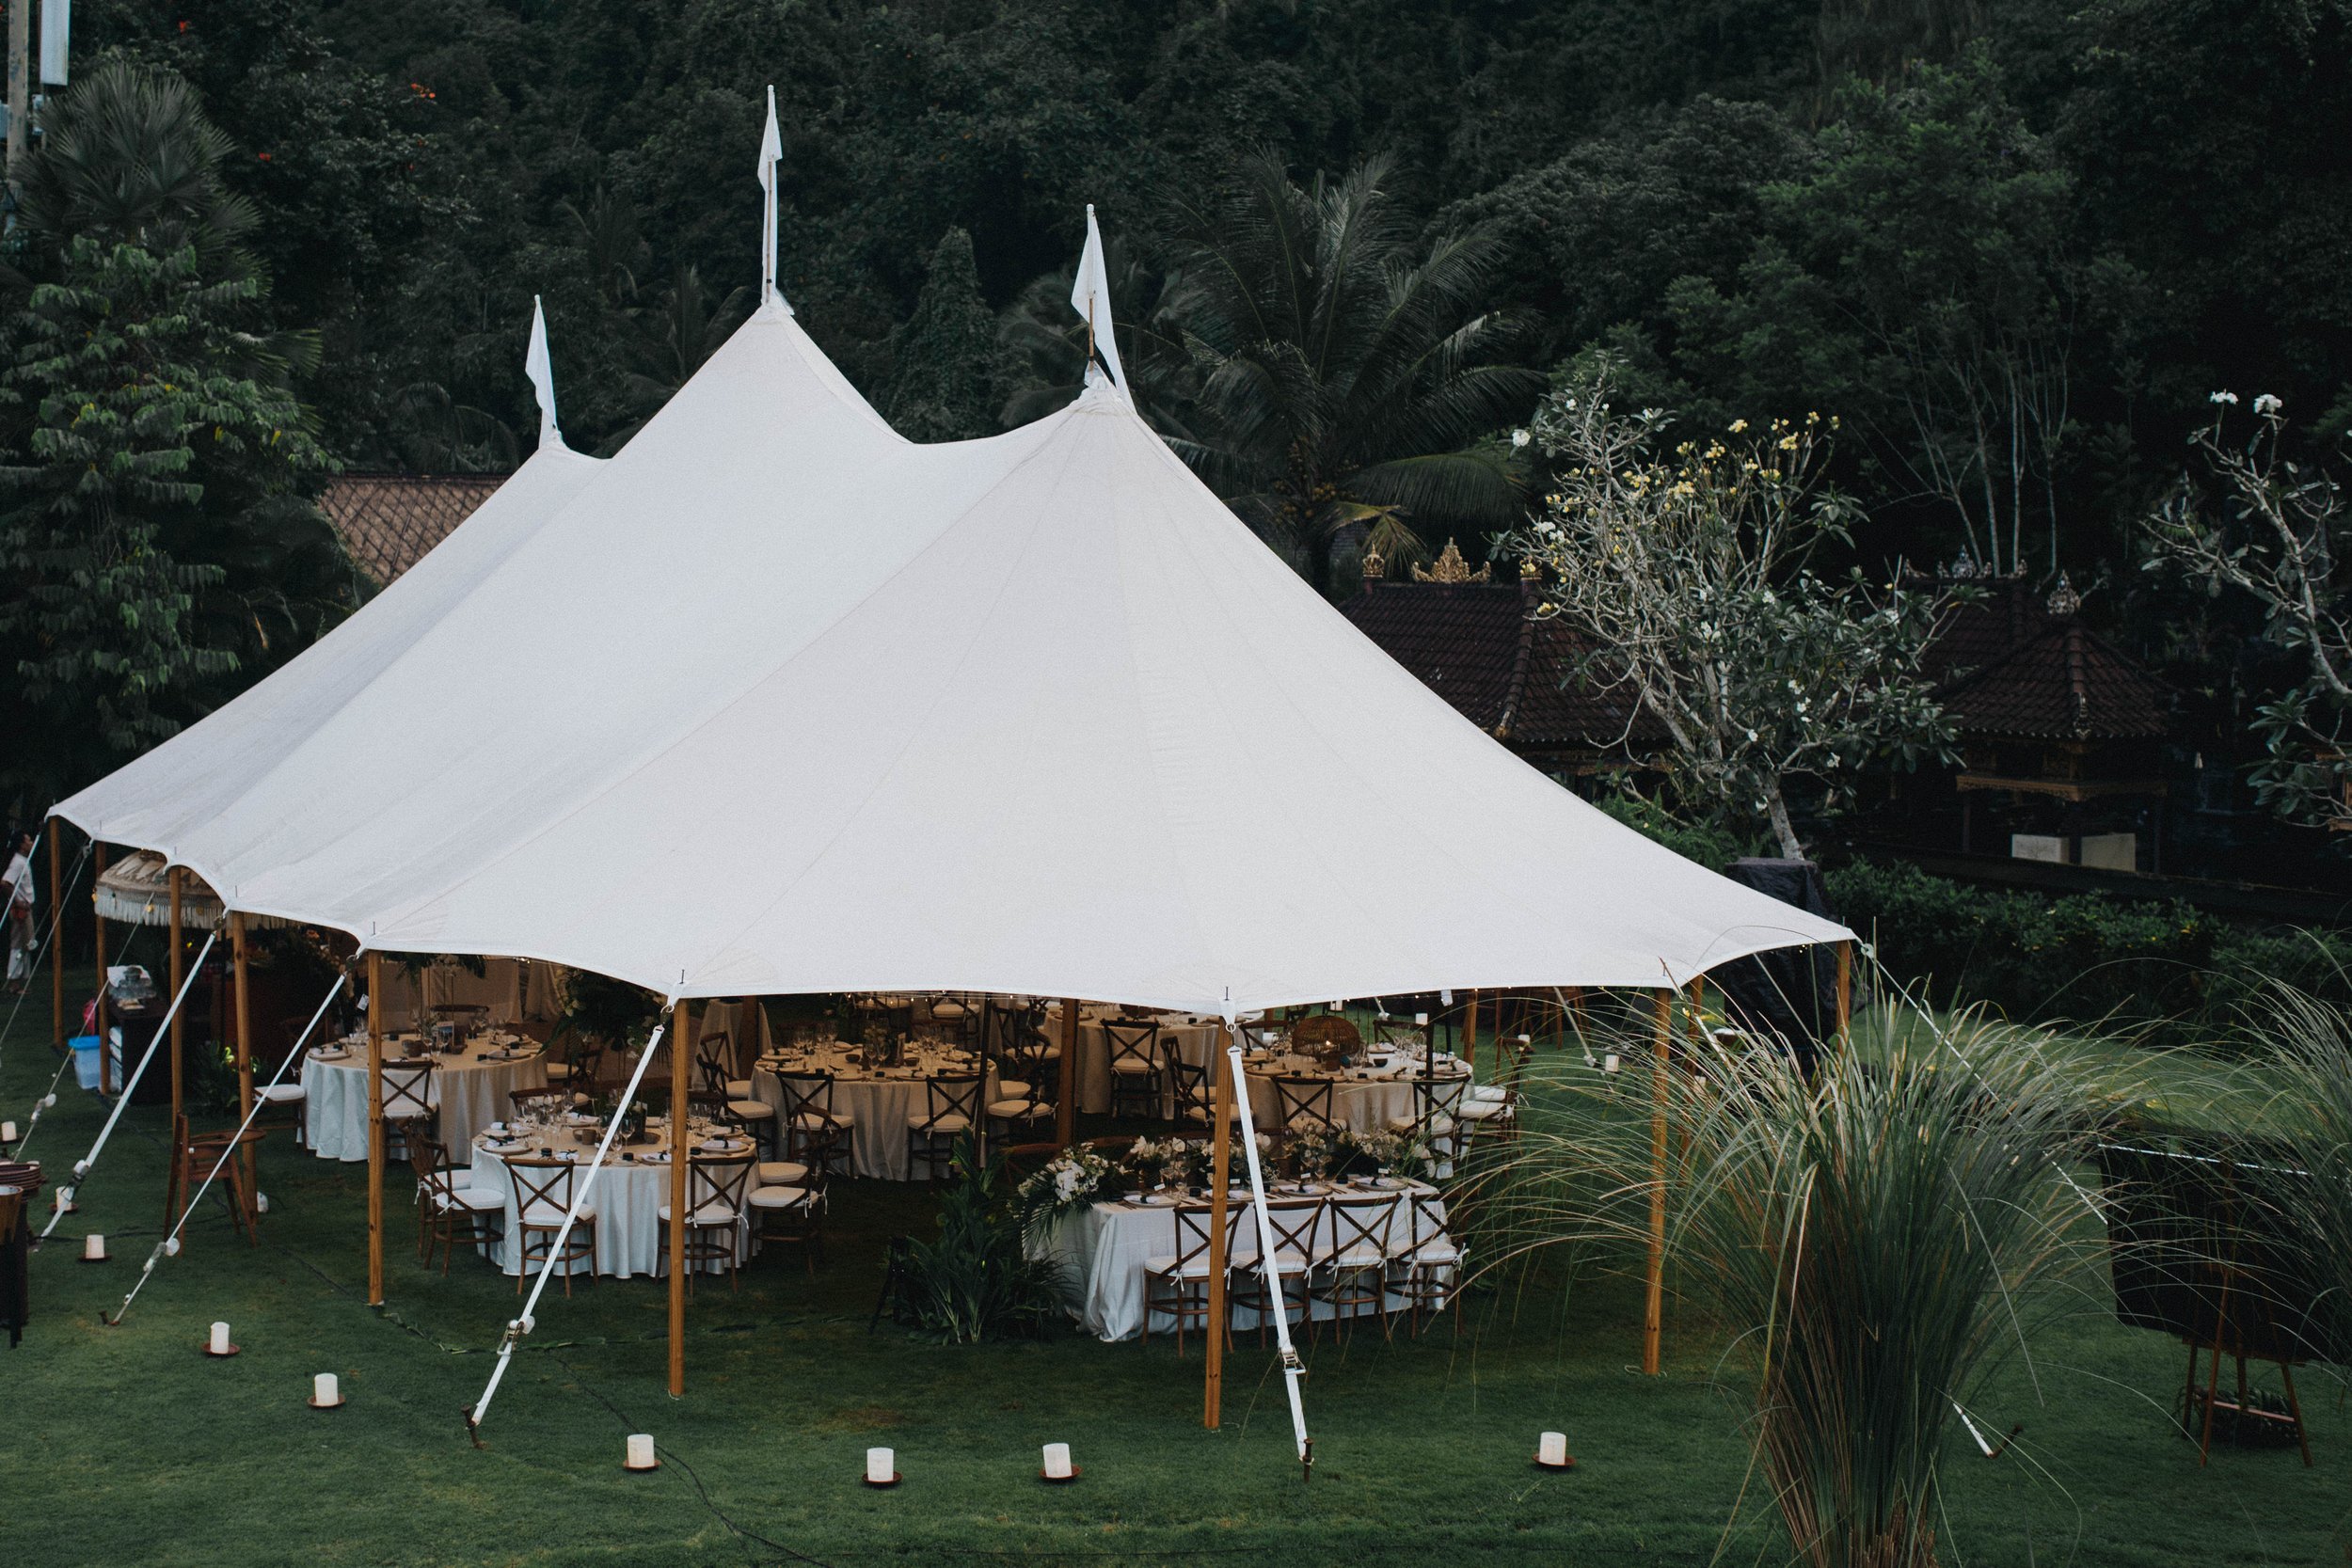 Sophisticated Wedding Venues, Image from A Tent in Bali